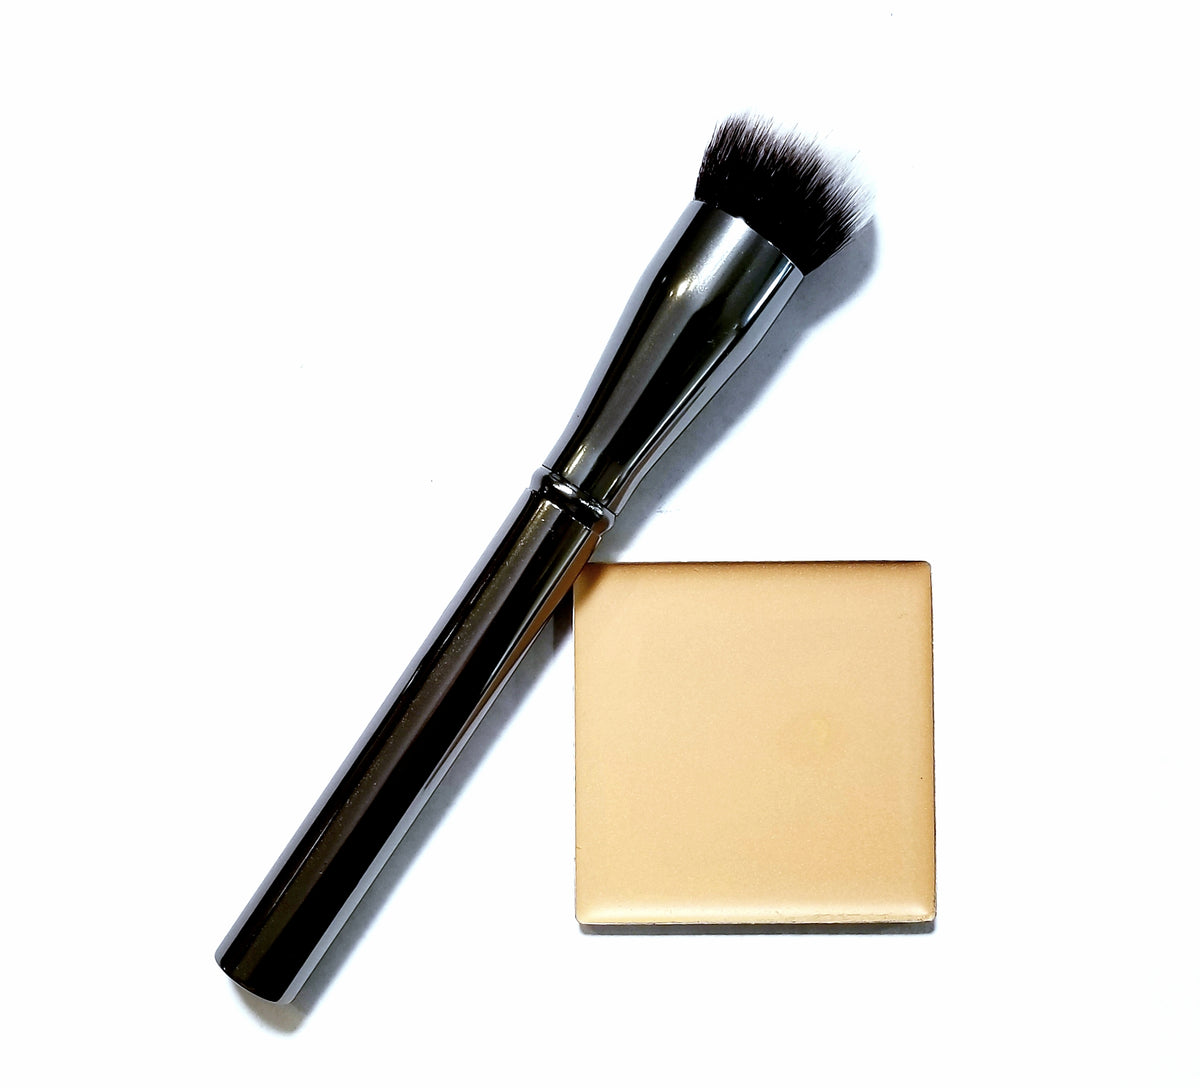 The Magic 3 in 1 Foundation and application brush